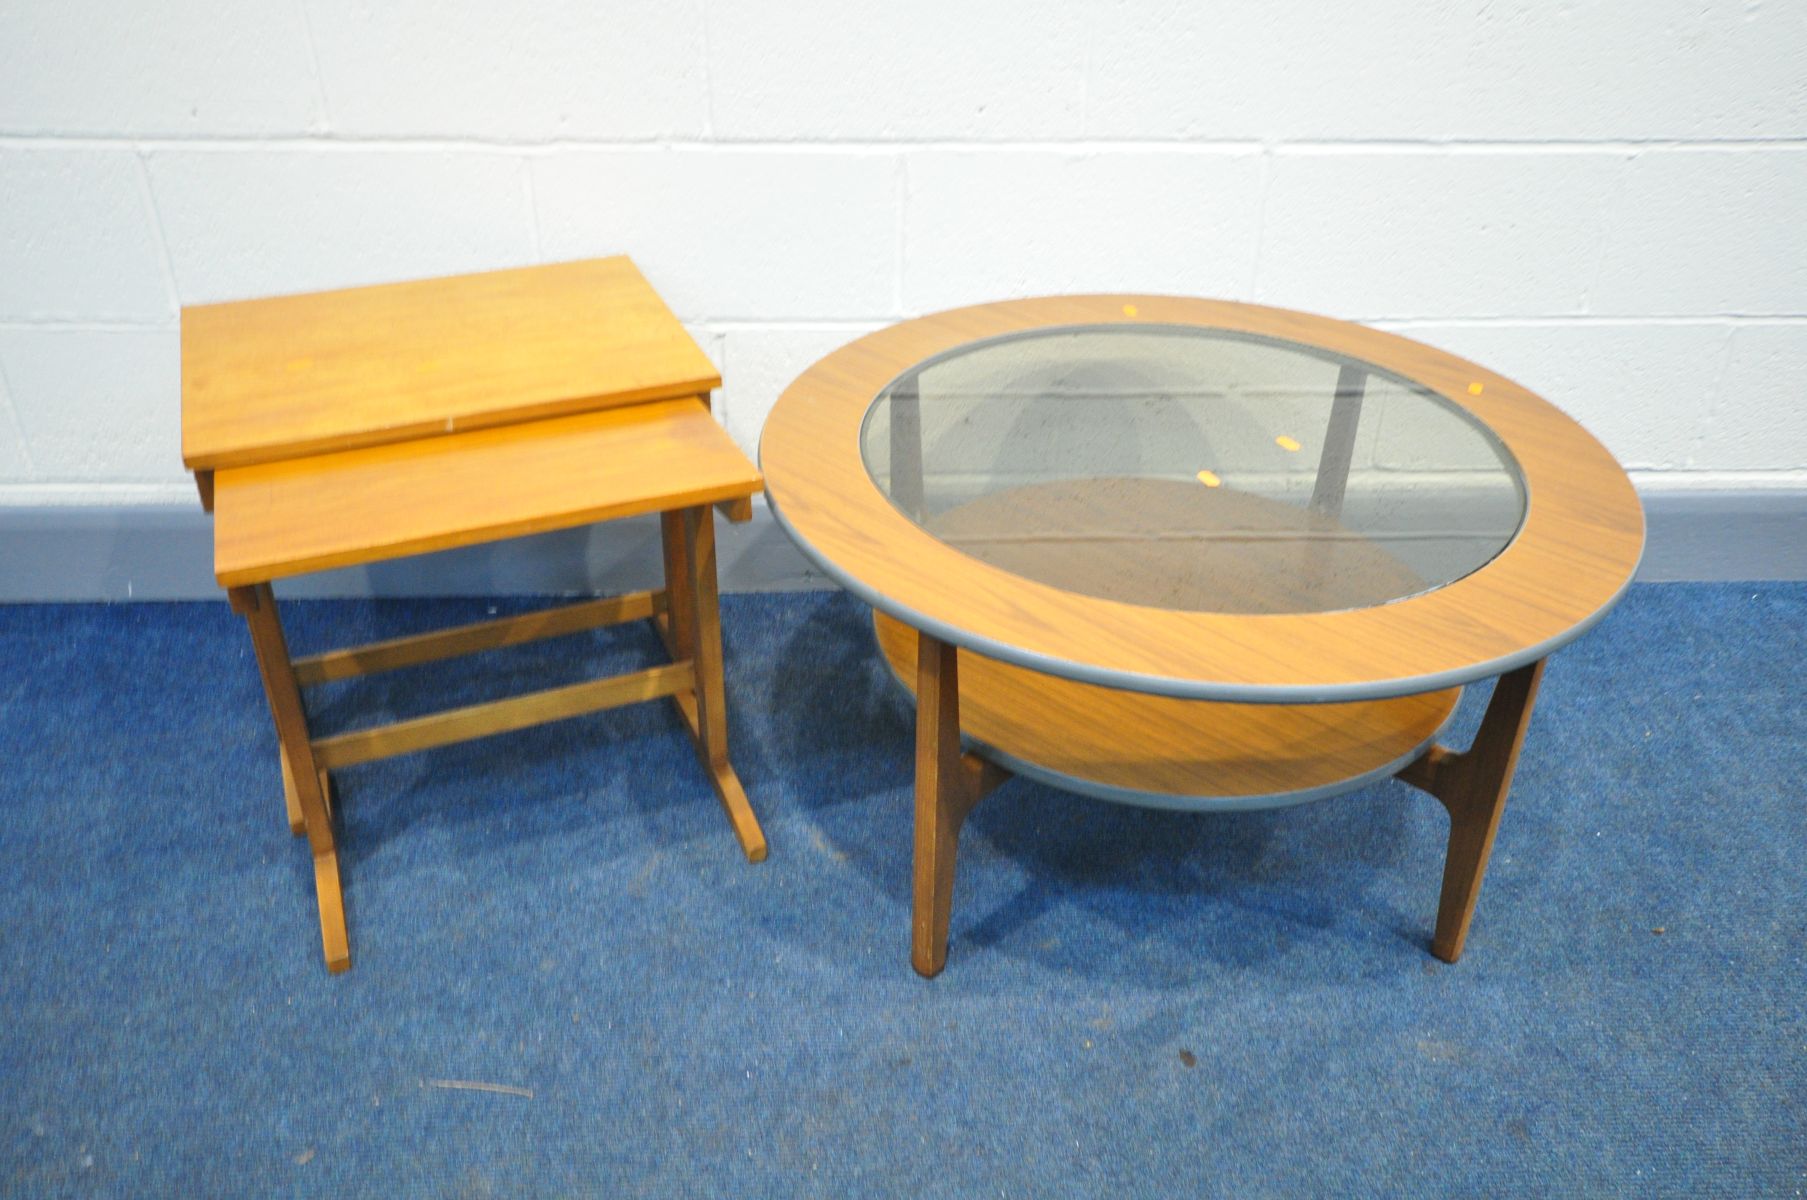 A MID CENTURY TEAK CIRCULAR COFFEE TABLE, with a glass insert, diameter 85cm x height 46cm, and a